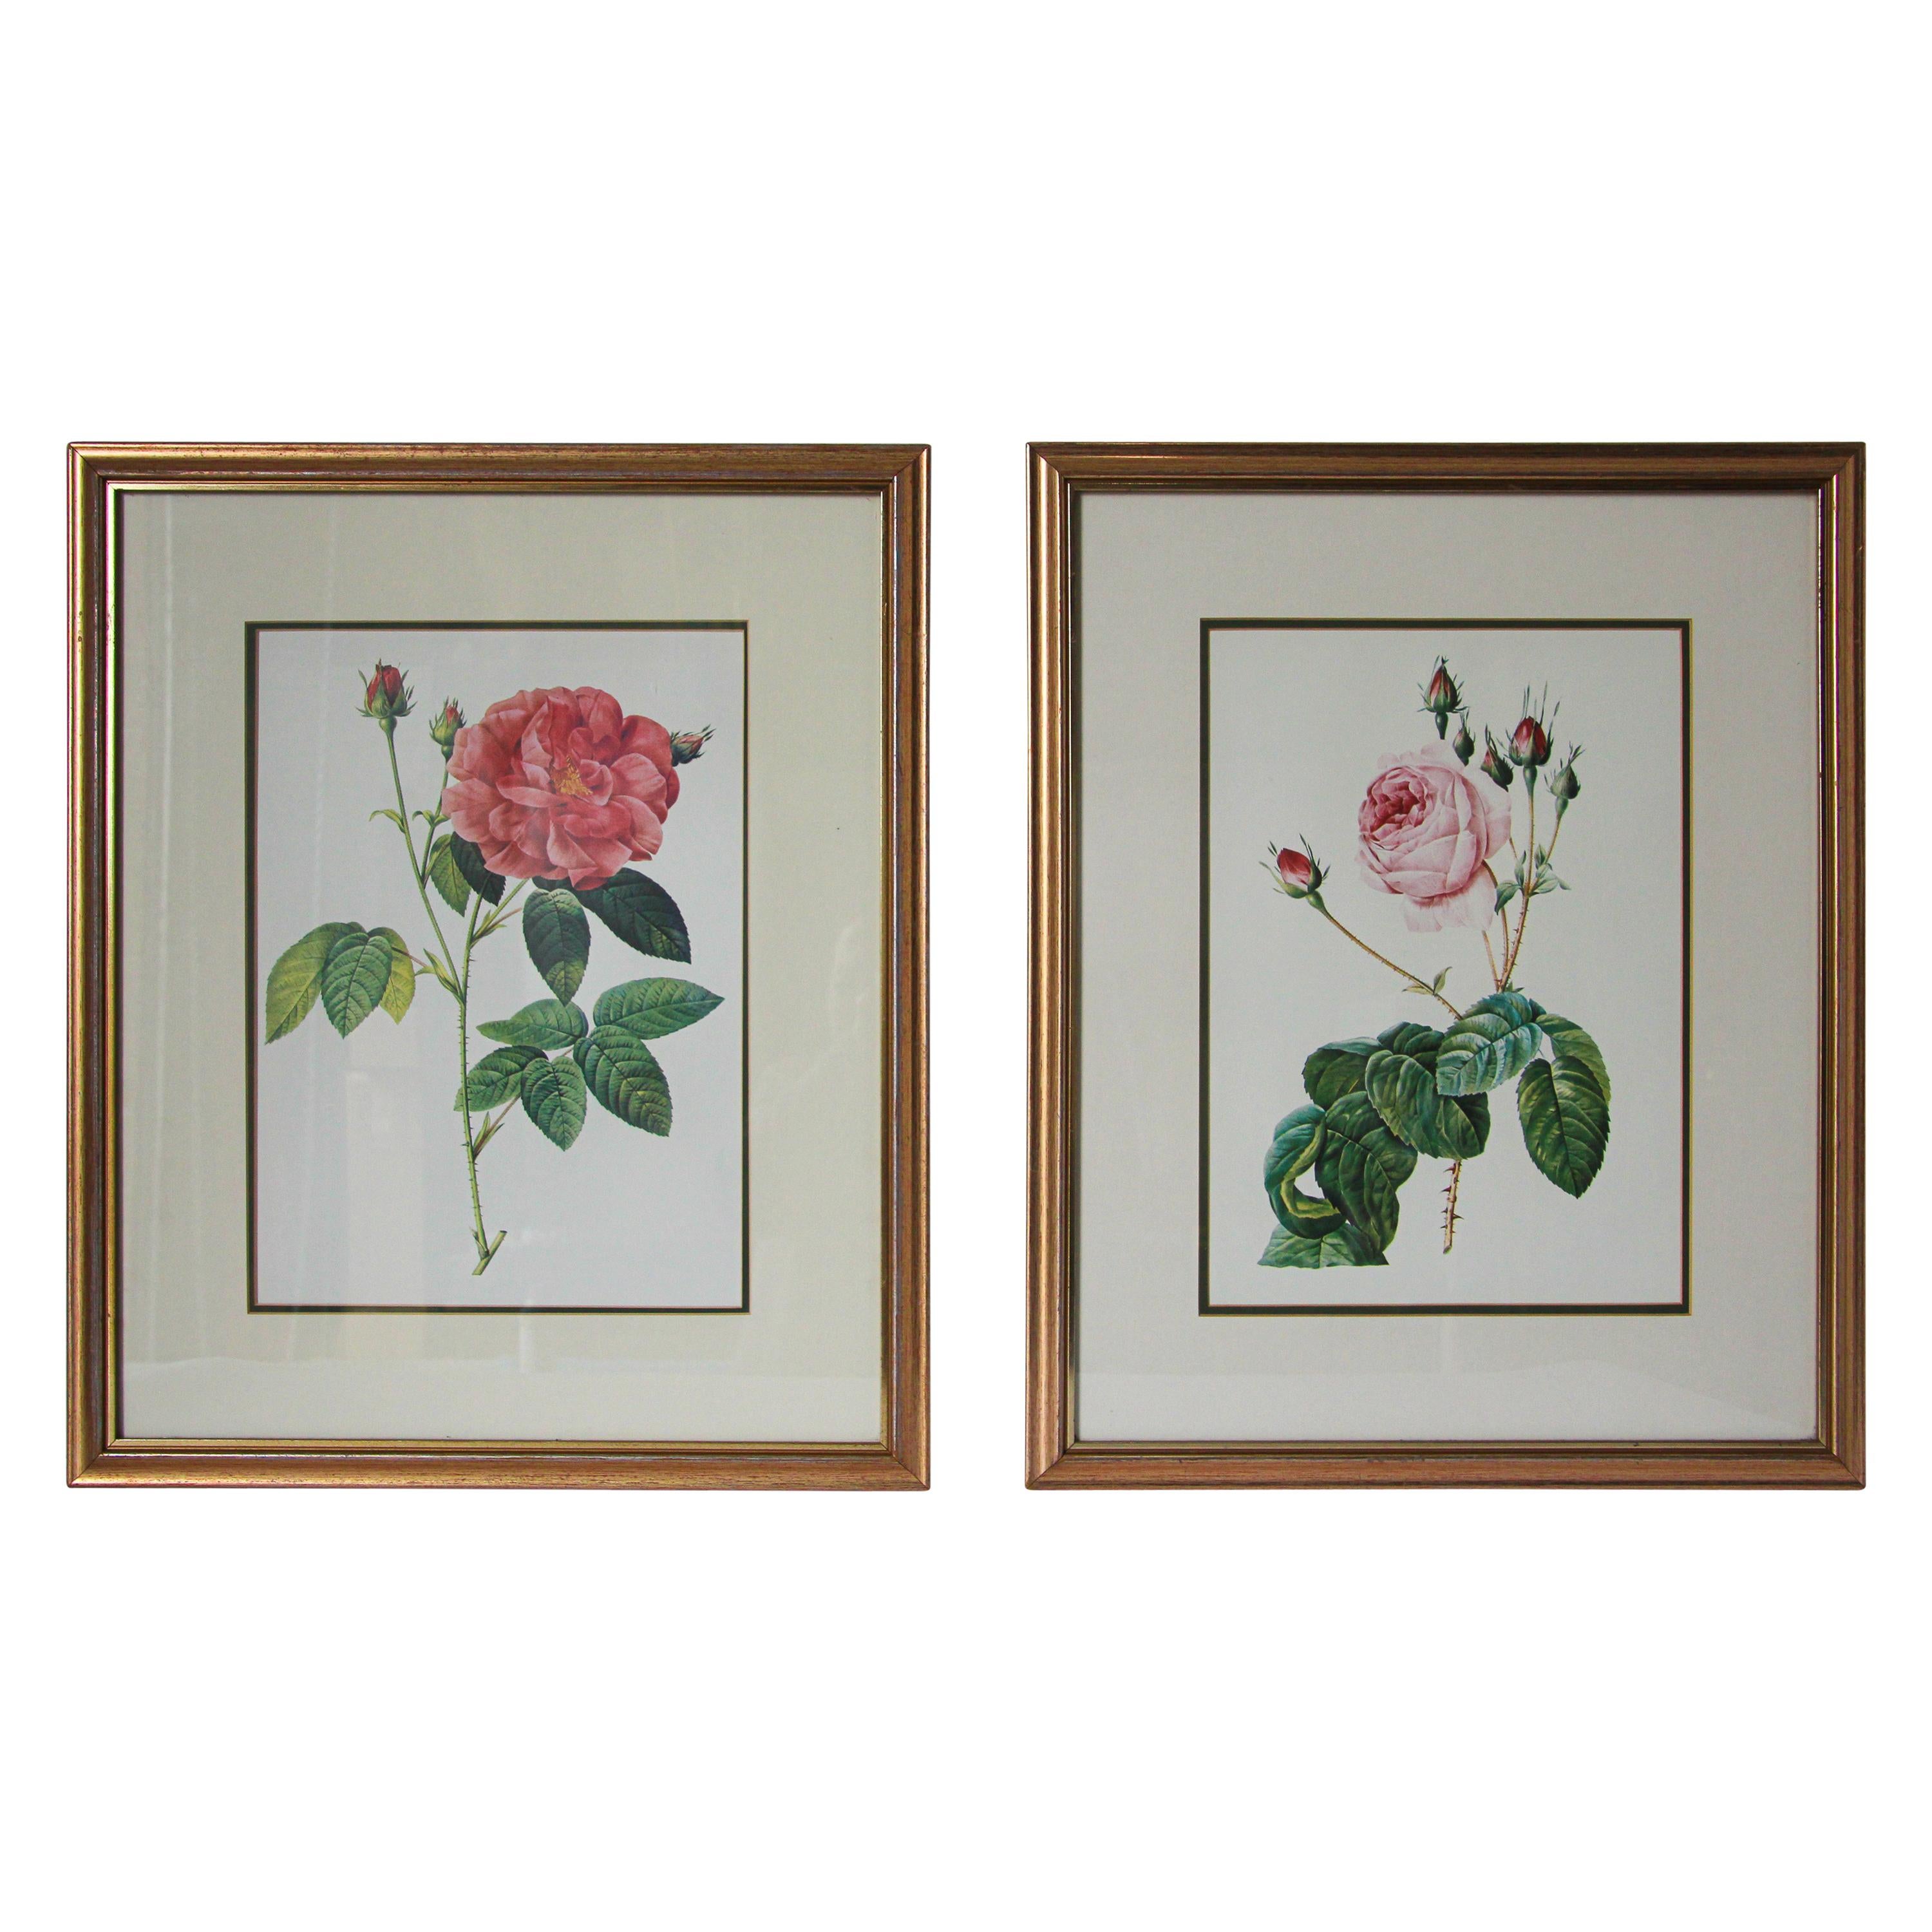 Pair of Botanical Rose Prints after Pierre-Joseph Redoute